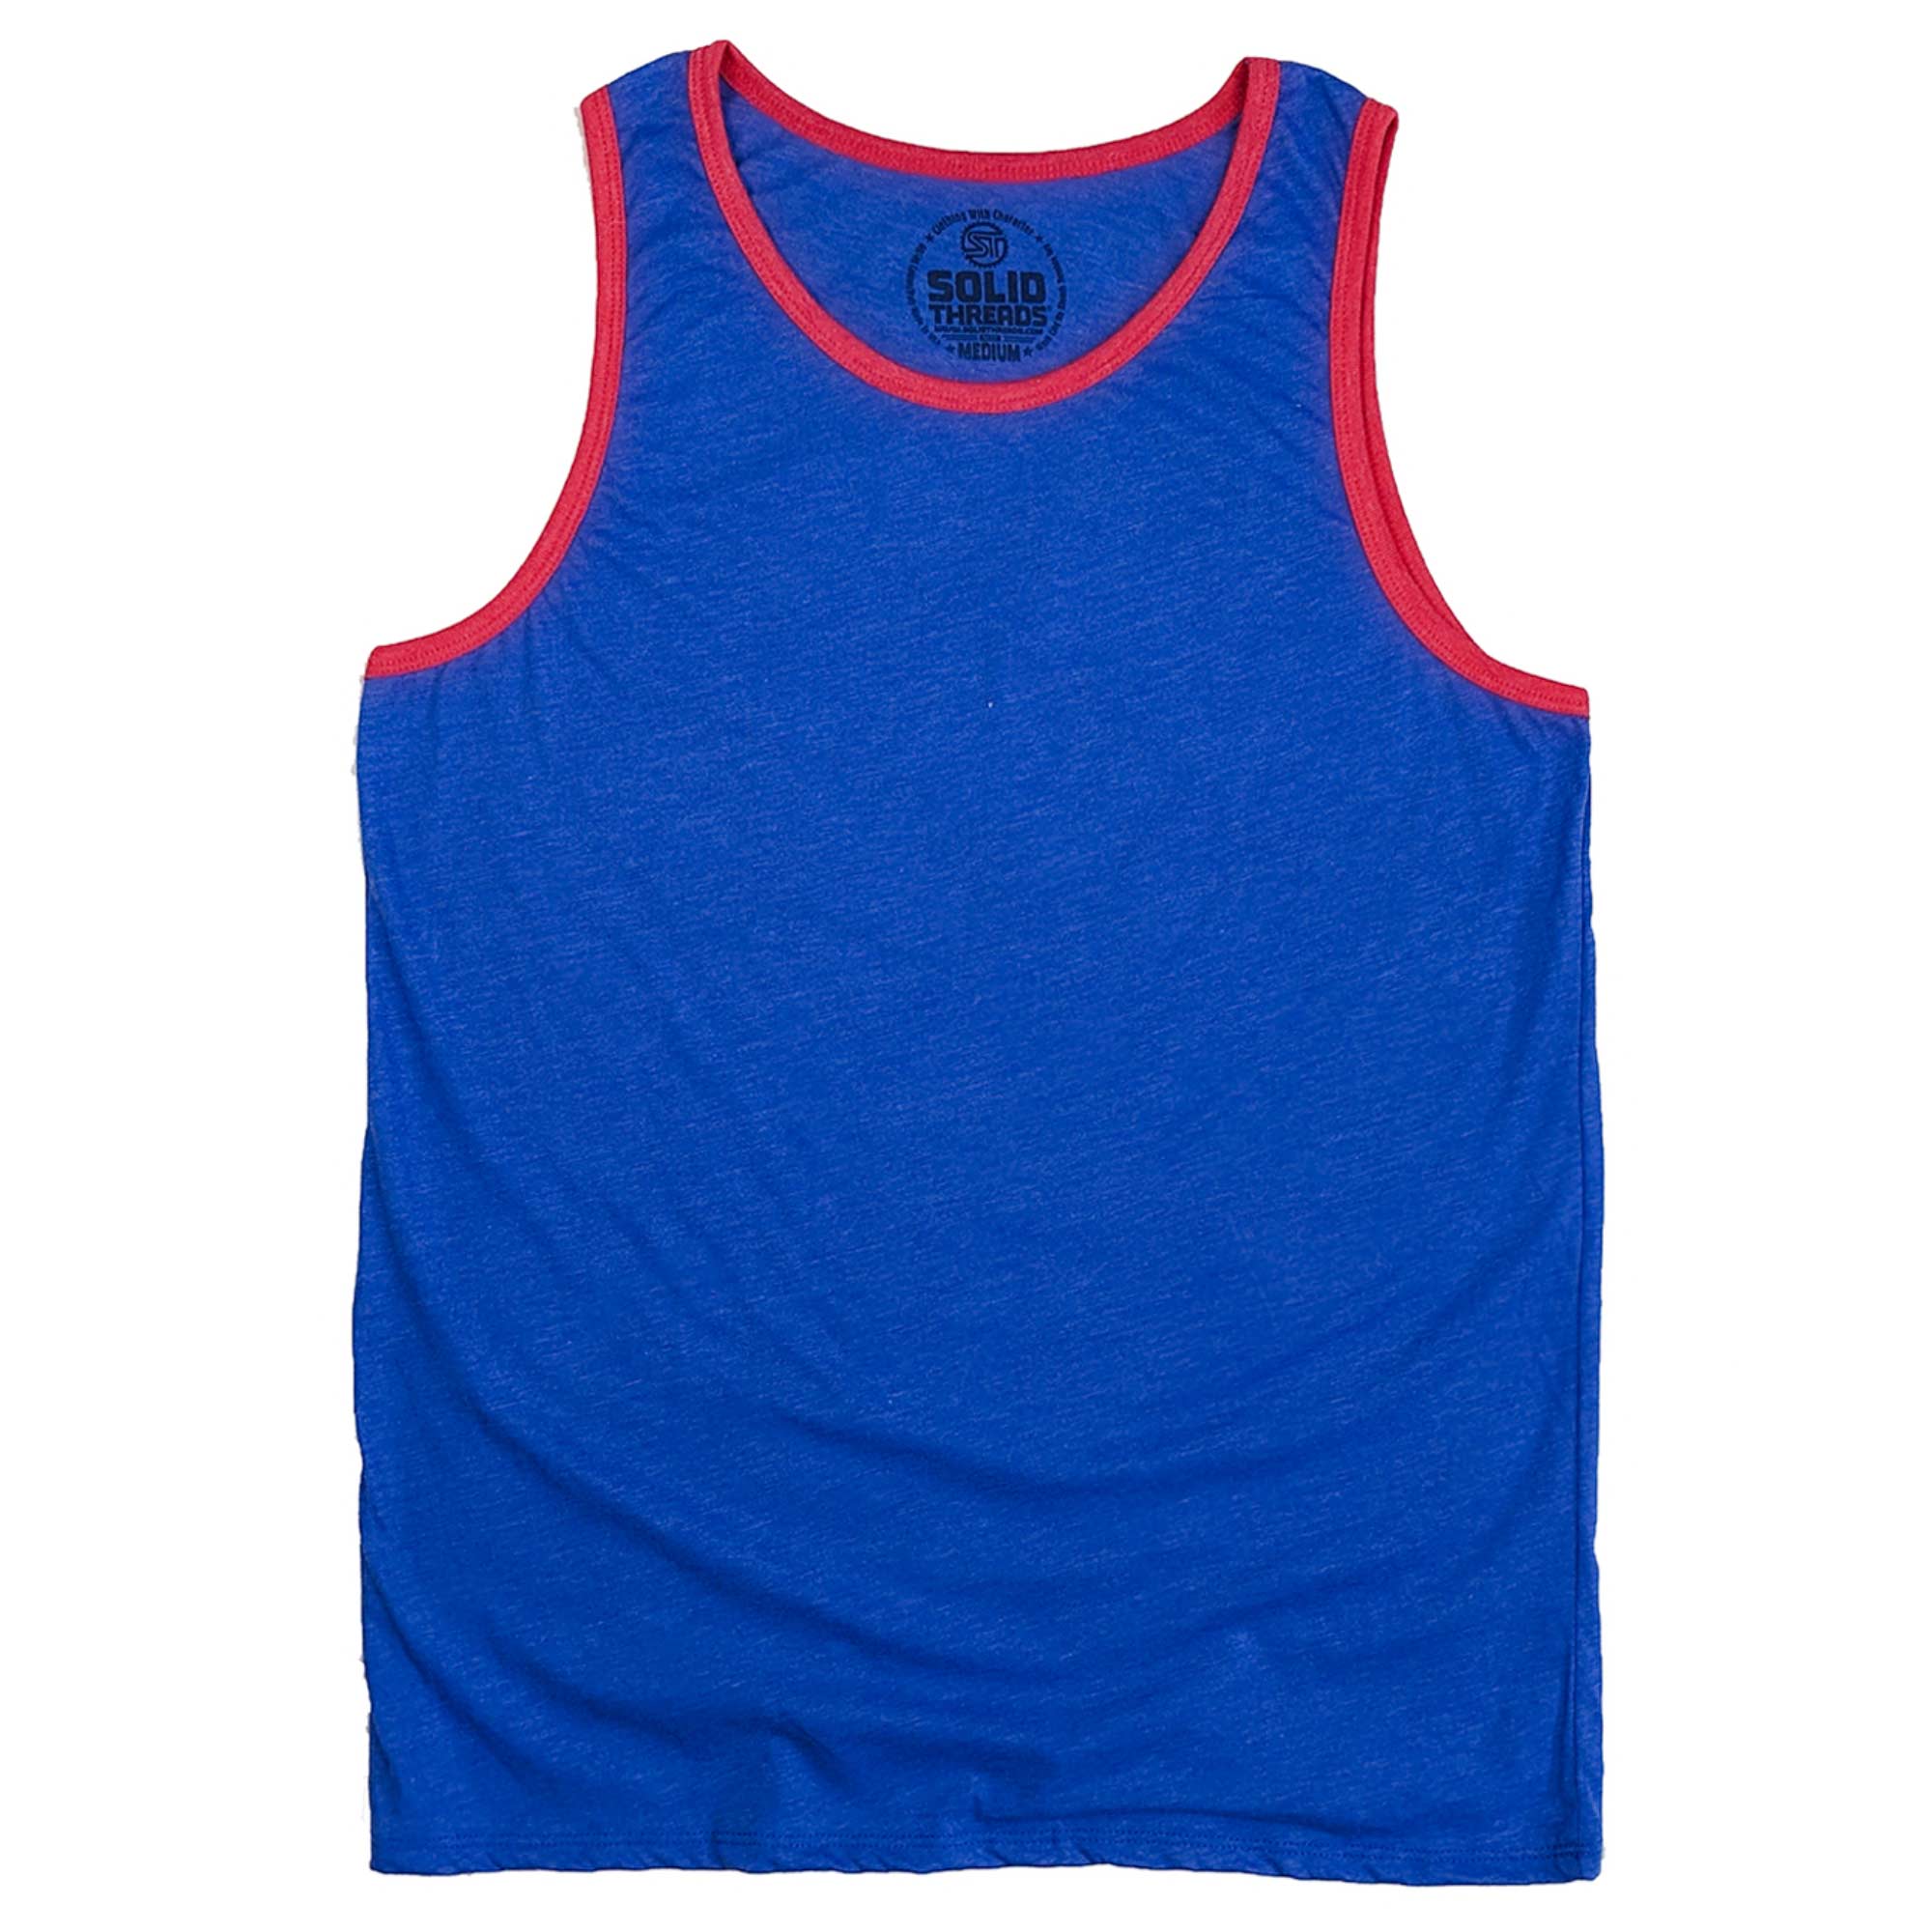 Men's Solid Threads Retro Ringer Tank Top Royal/Red | Vintage Inspired USA Made Tank Top